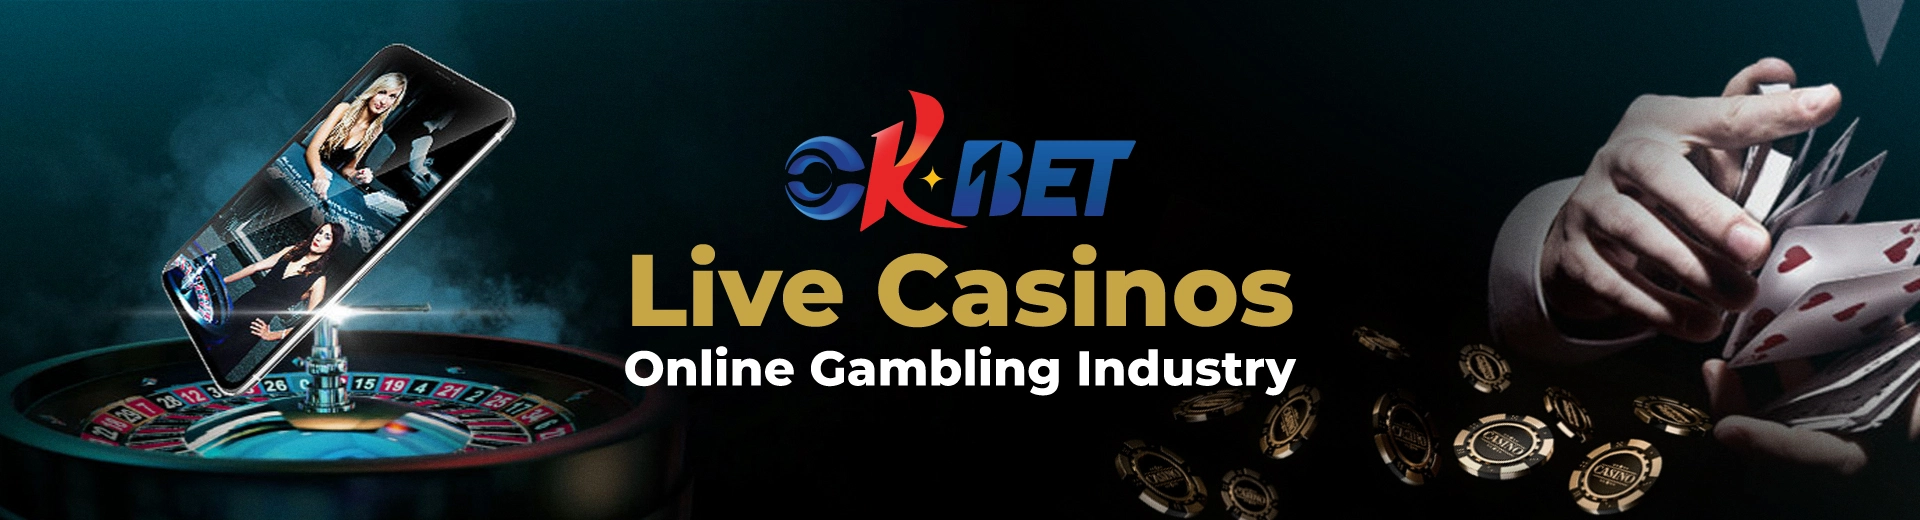 How OKBET Live Casinos are Changing the Online Gaming Industry - OKBET live casino